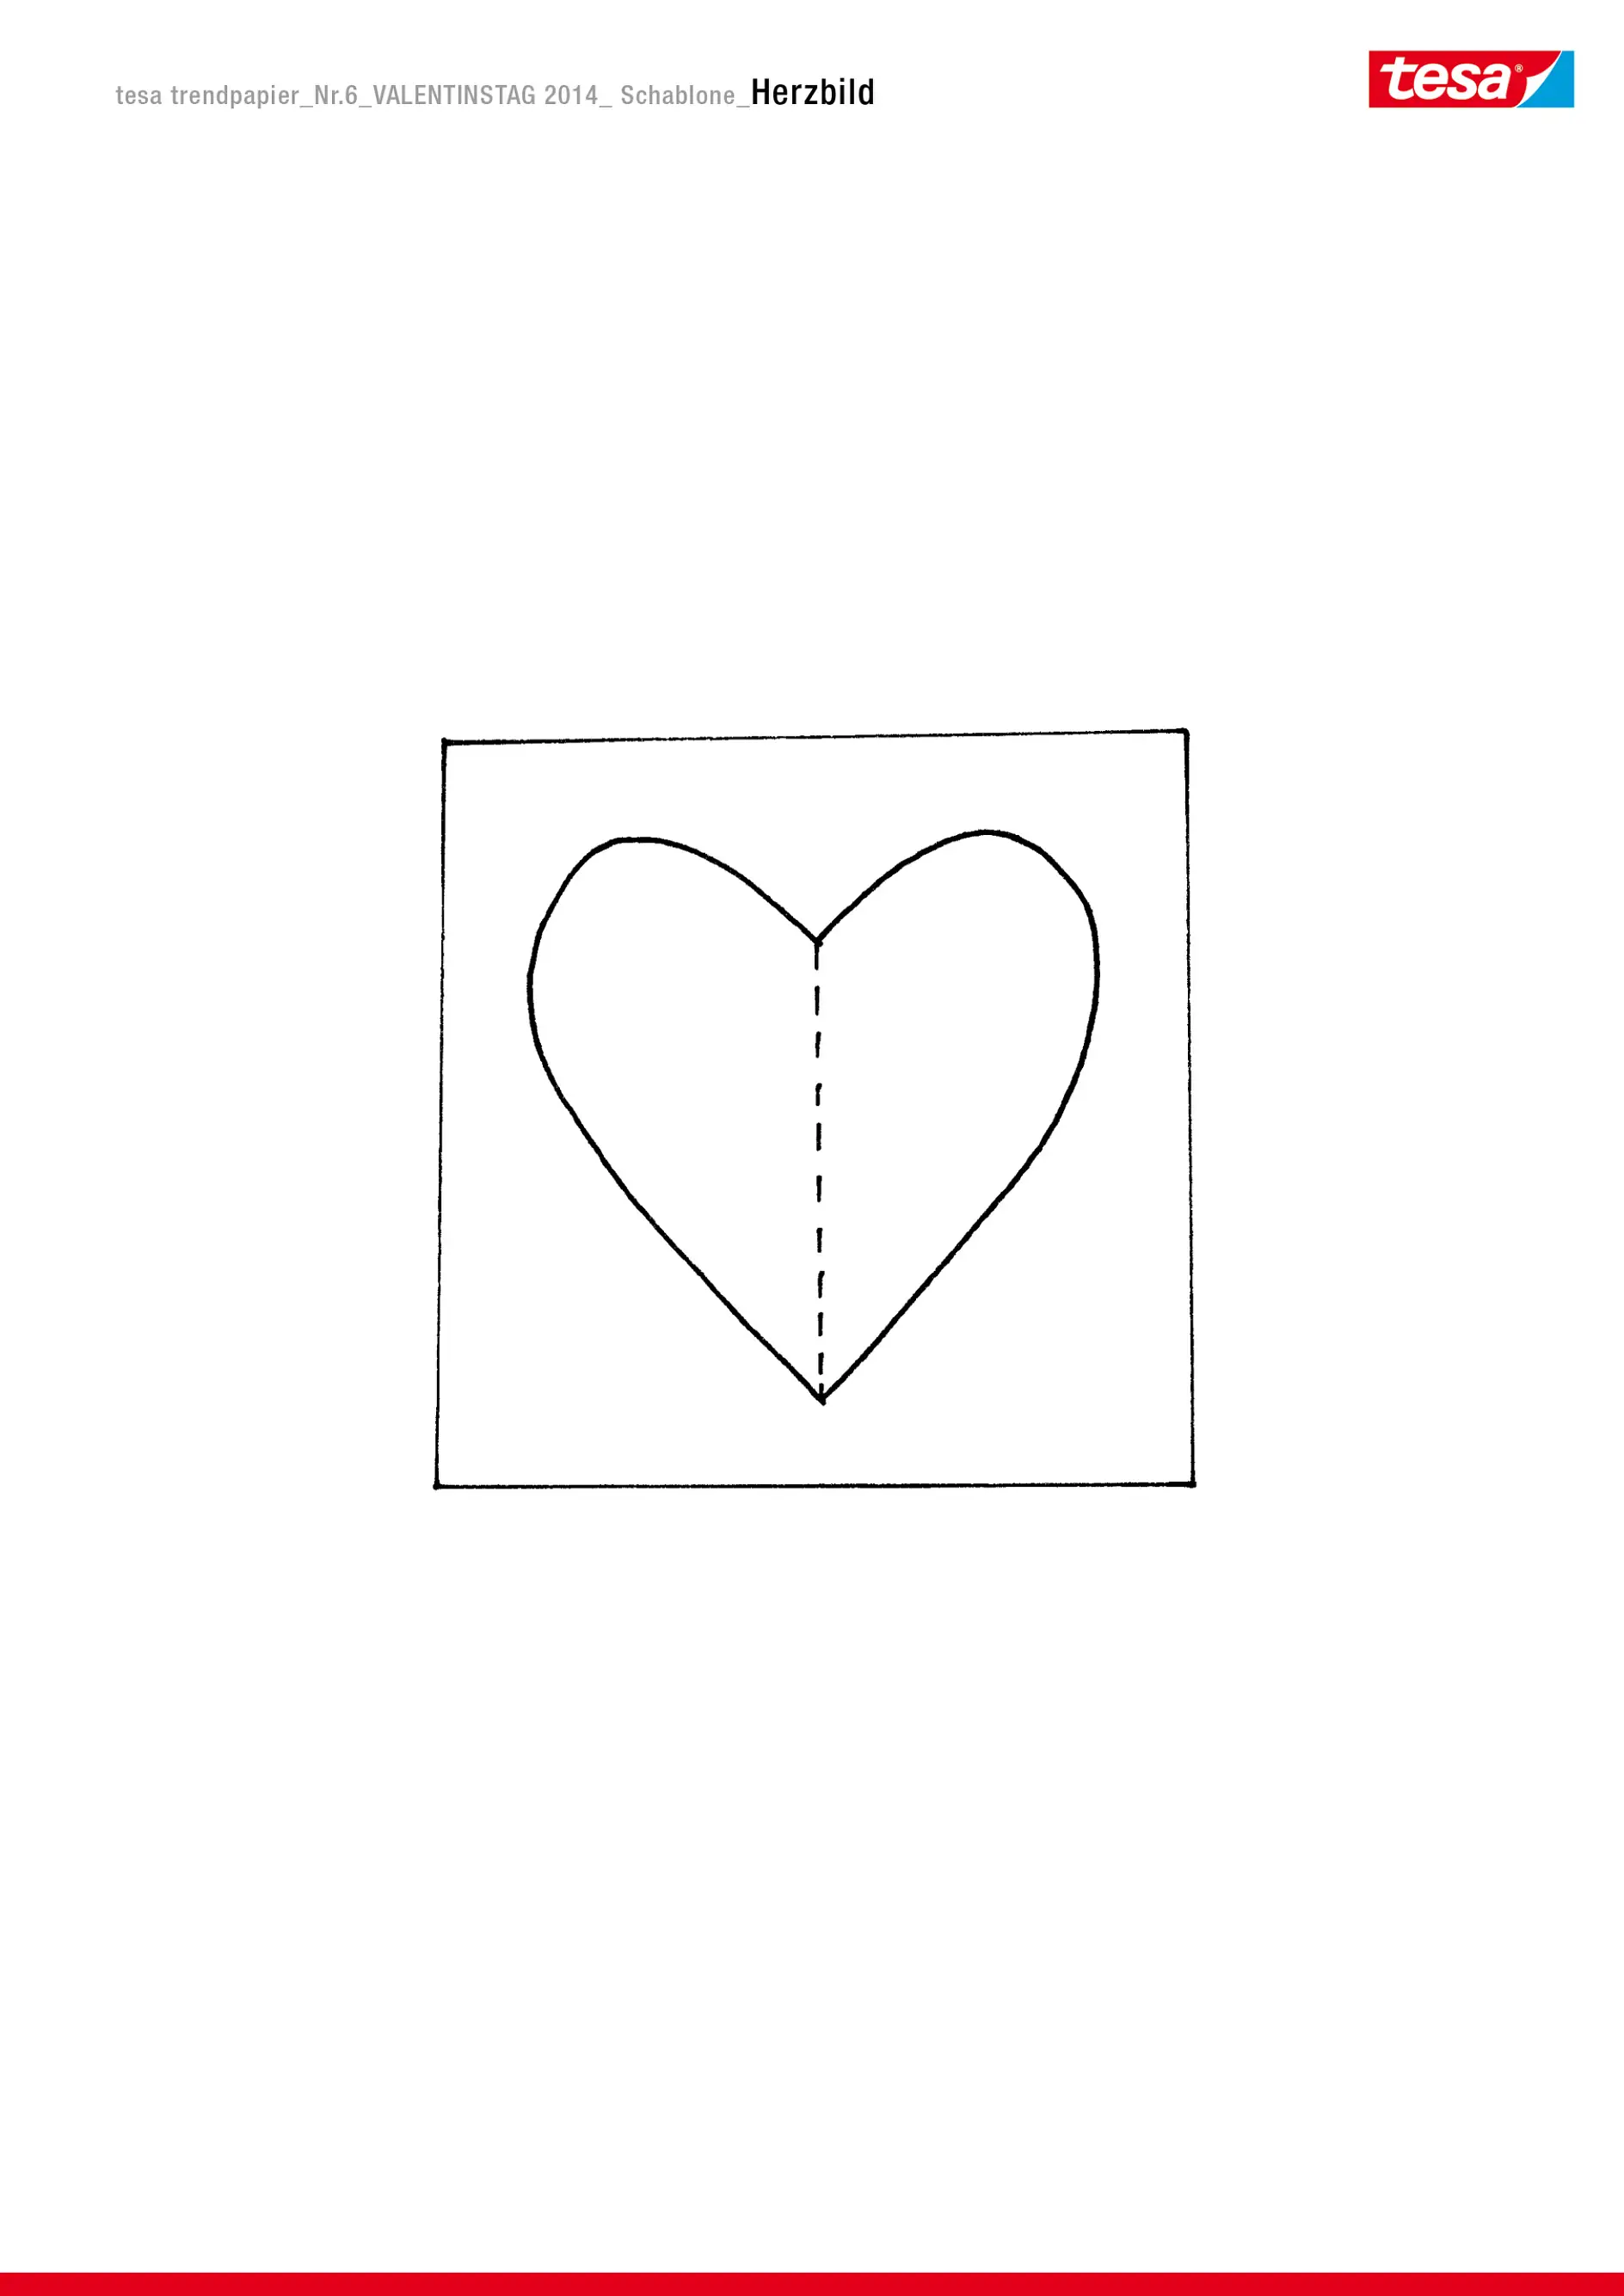 Download here the template for your heart.